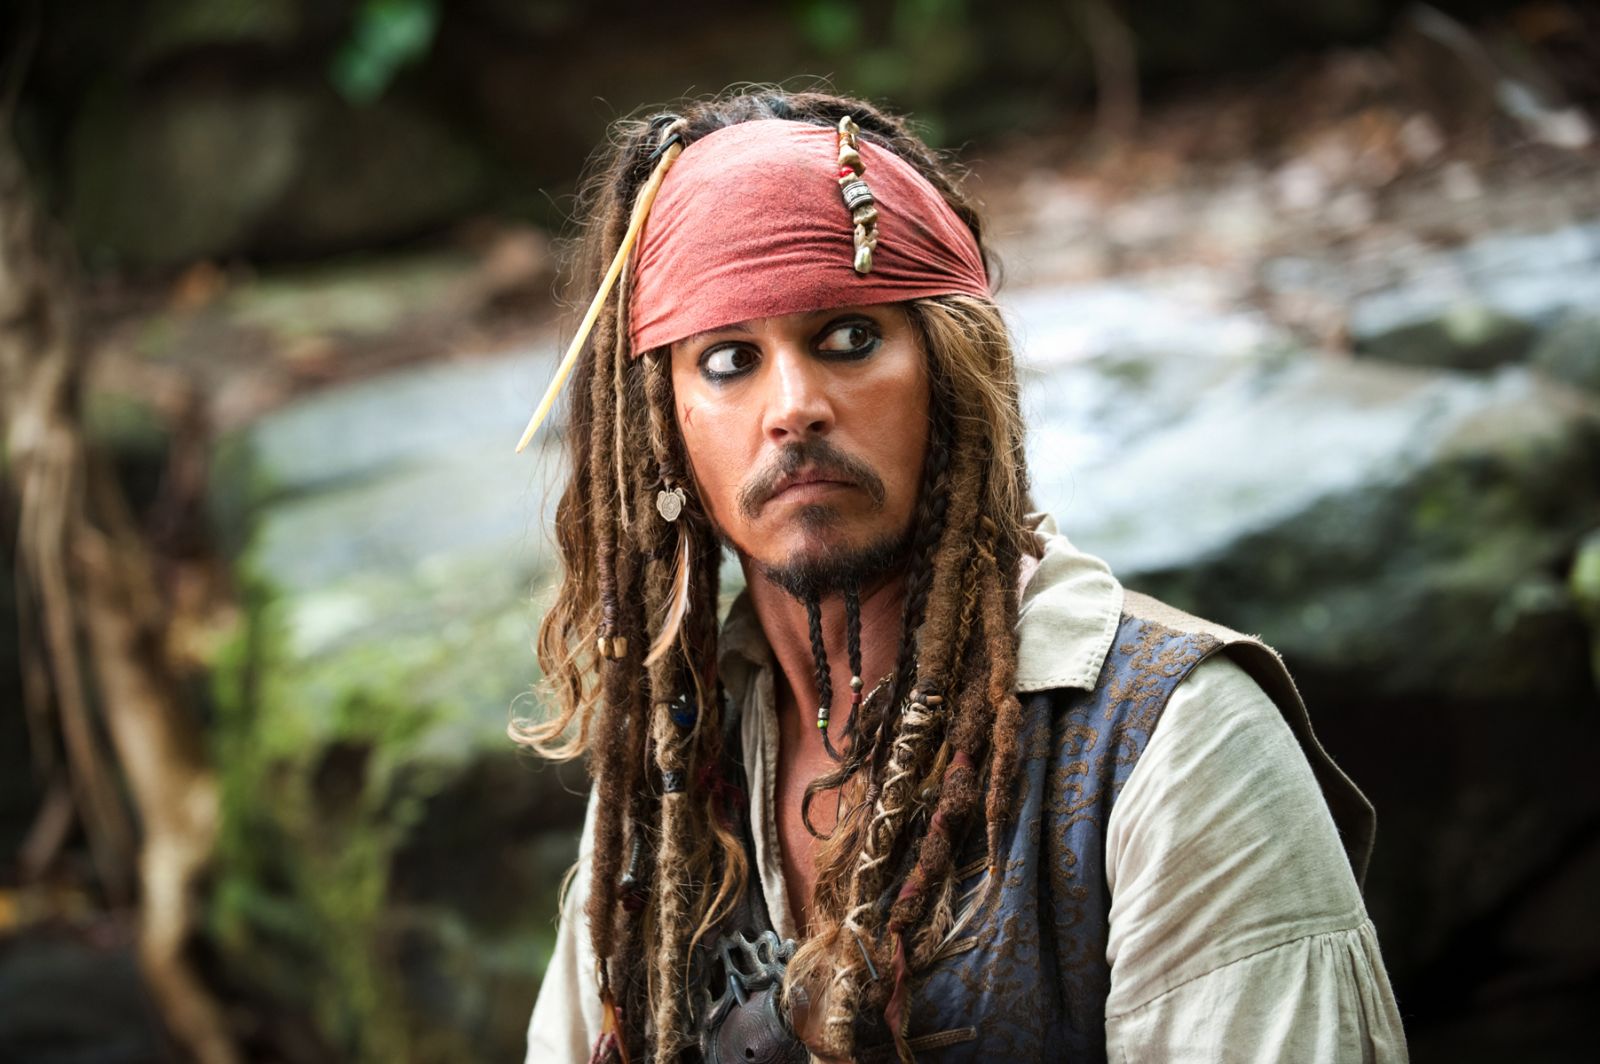 Movie News: Pirates of the Caribbean 5 gets a director(s)